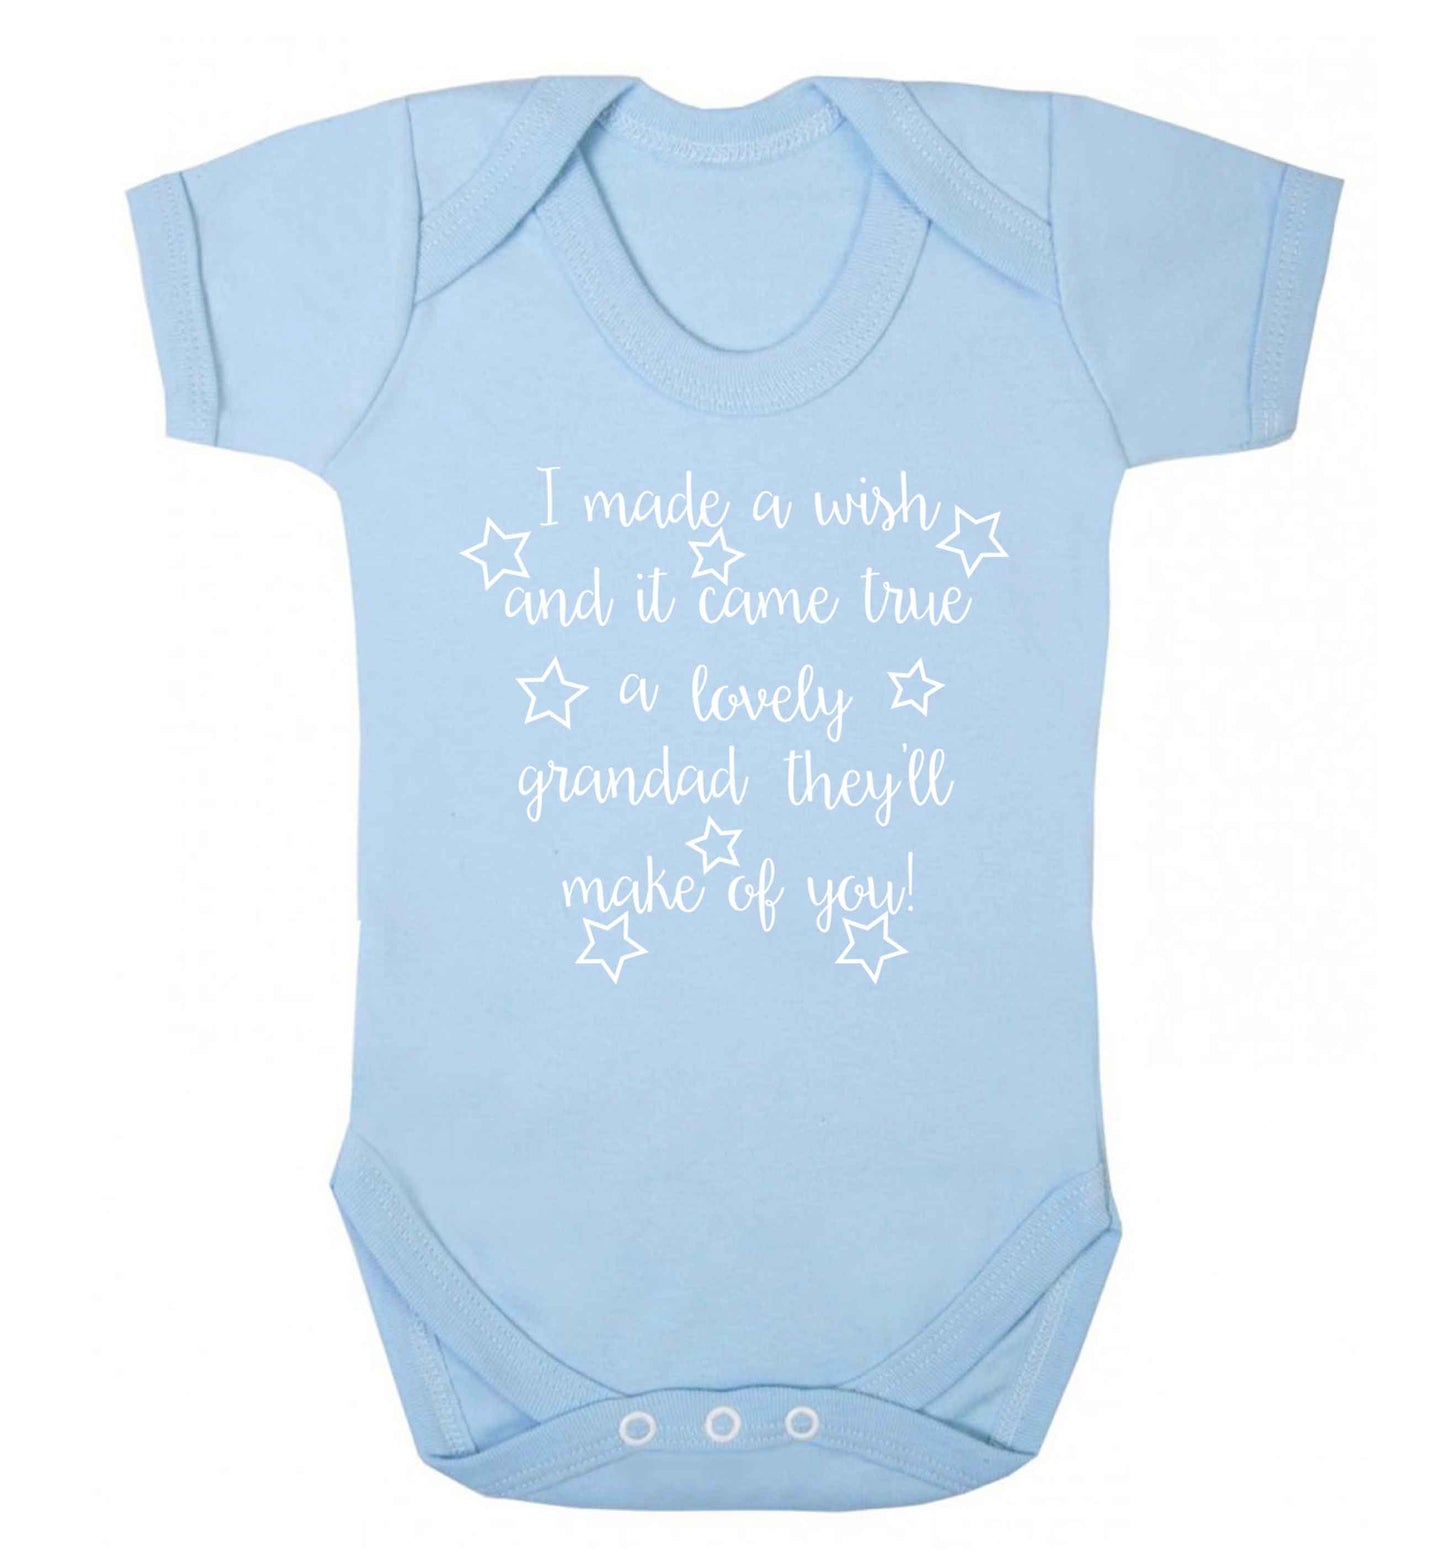 I made a wish and it came true a lovely grandad they'll make of you! Baby Vest pale blue 18-24 months